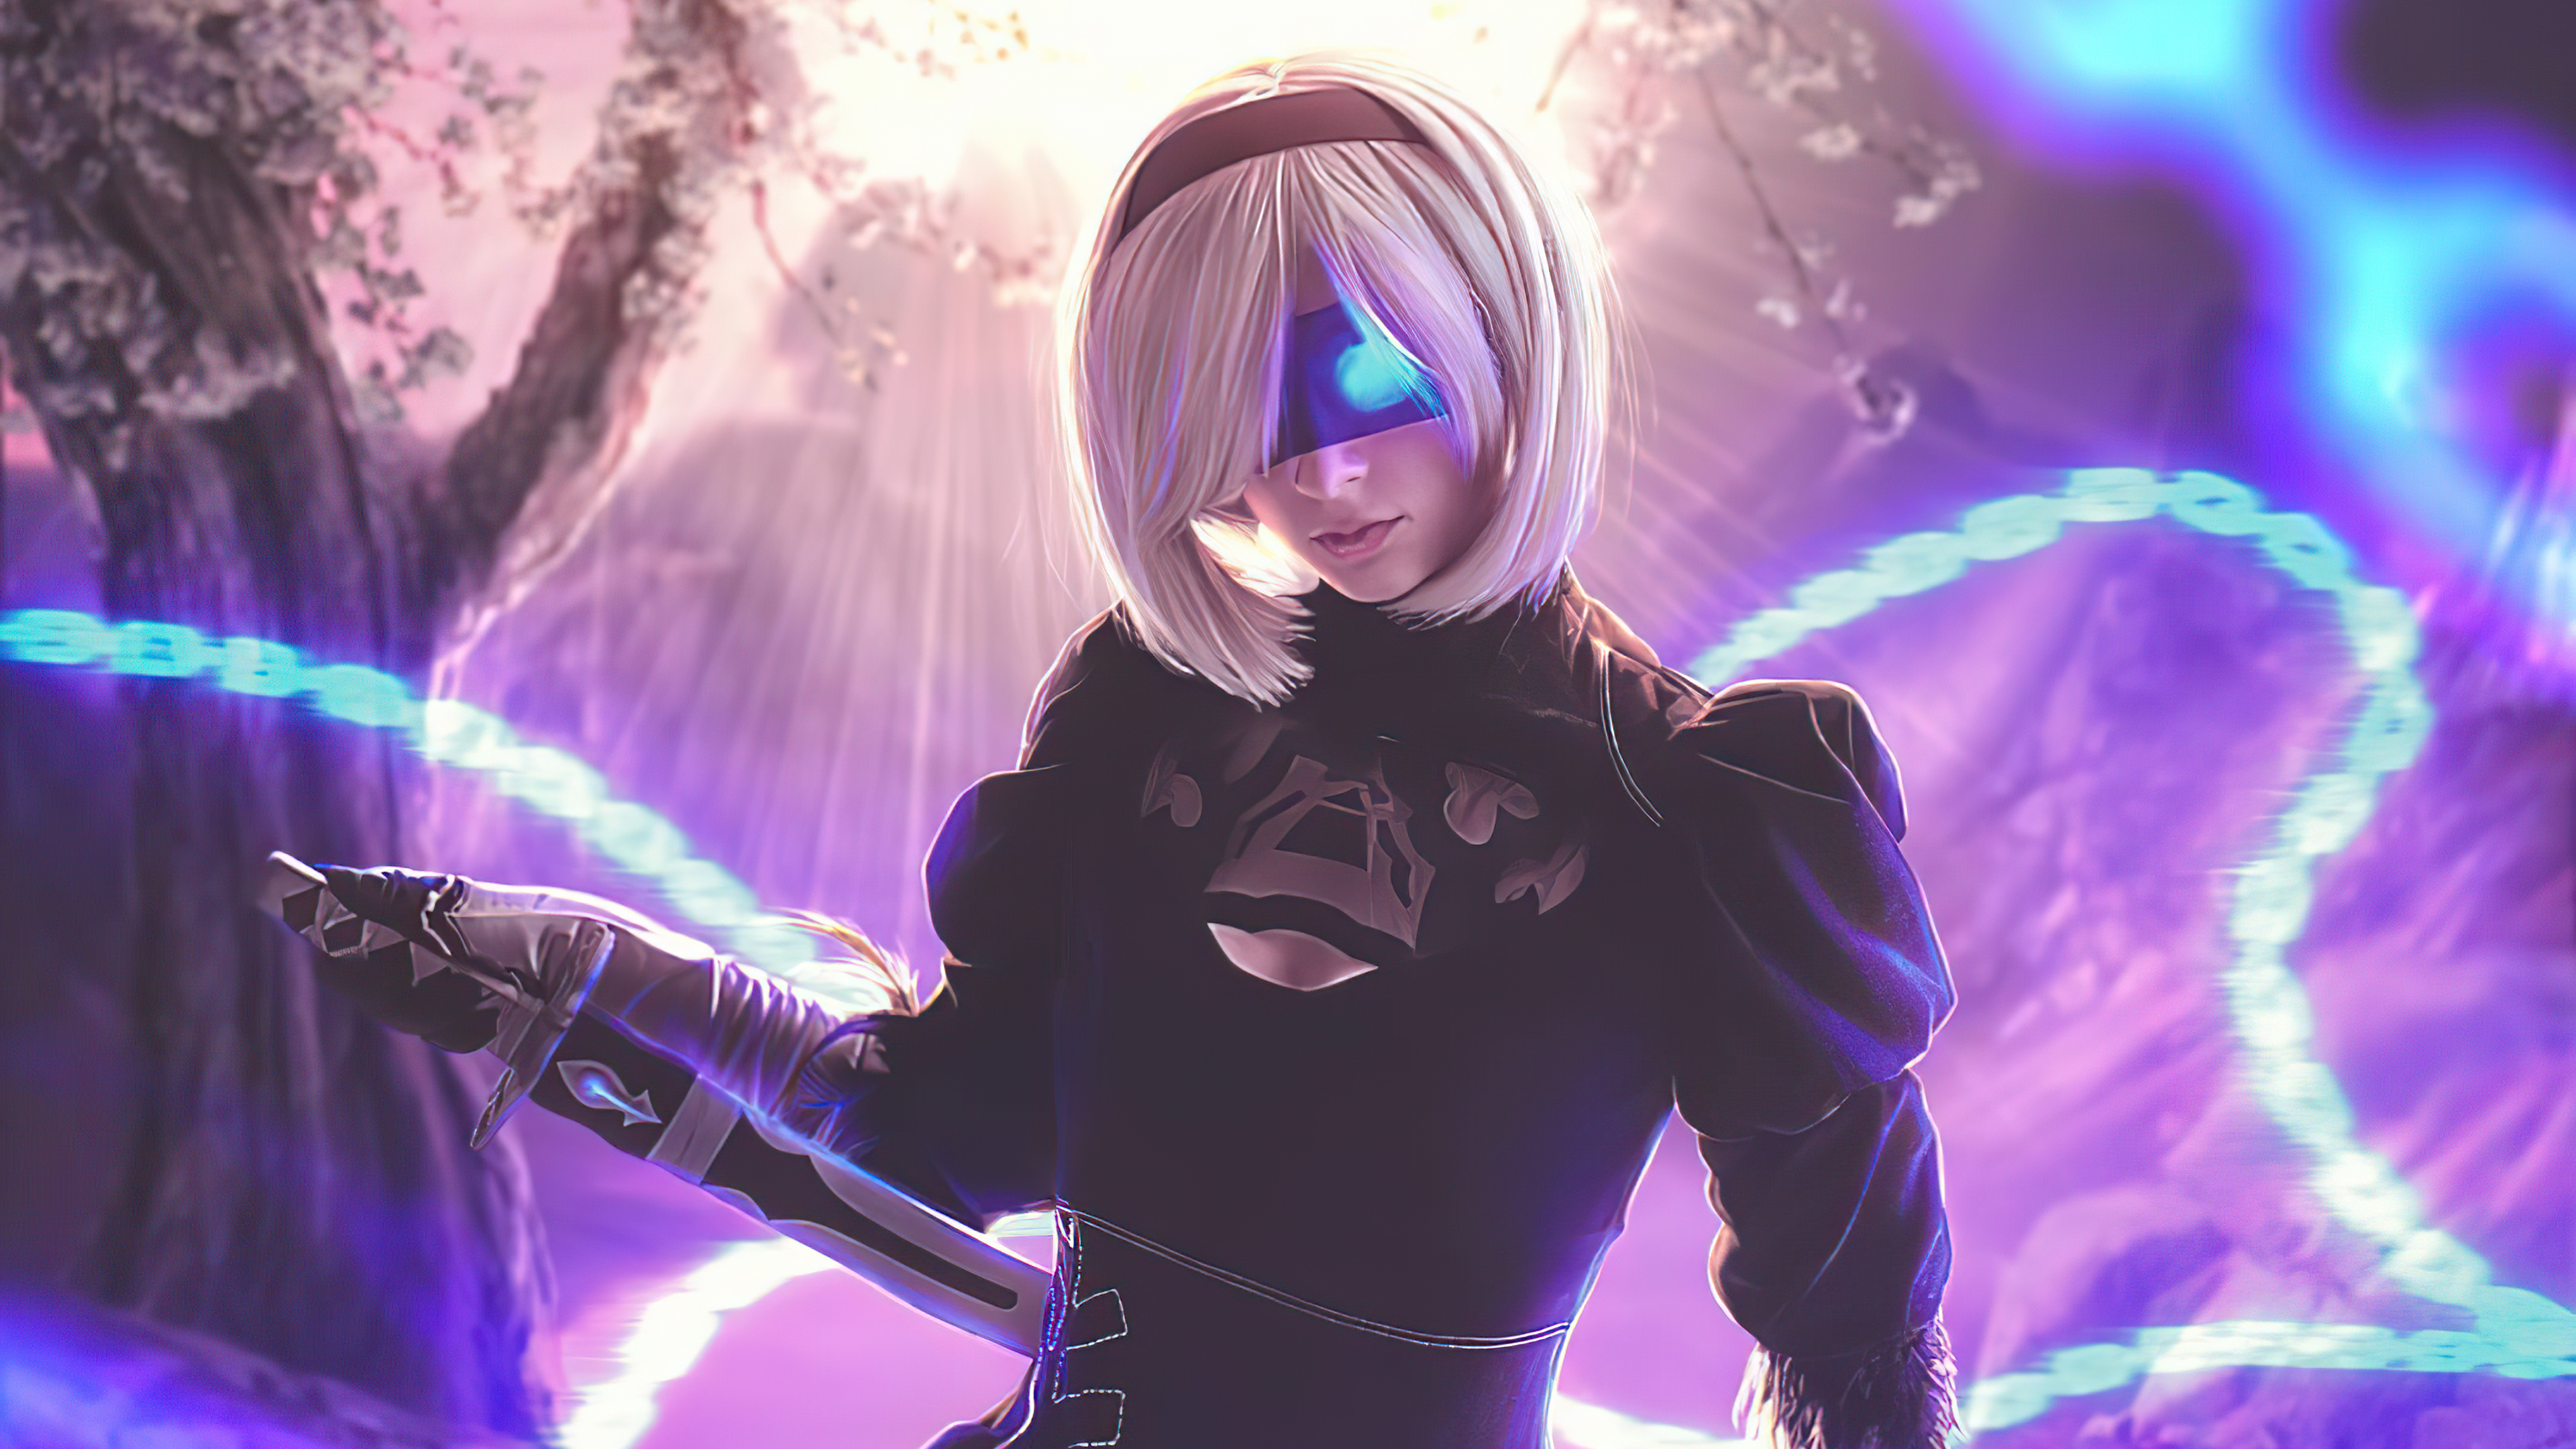 Wallpapers nier automata games chain on the desktop